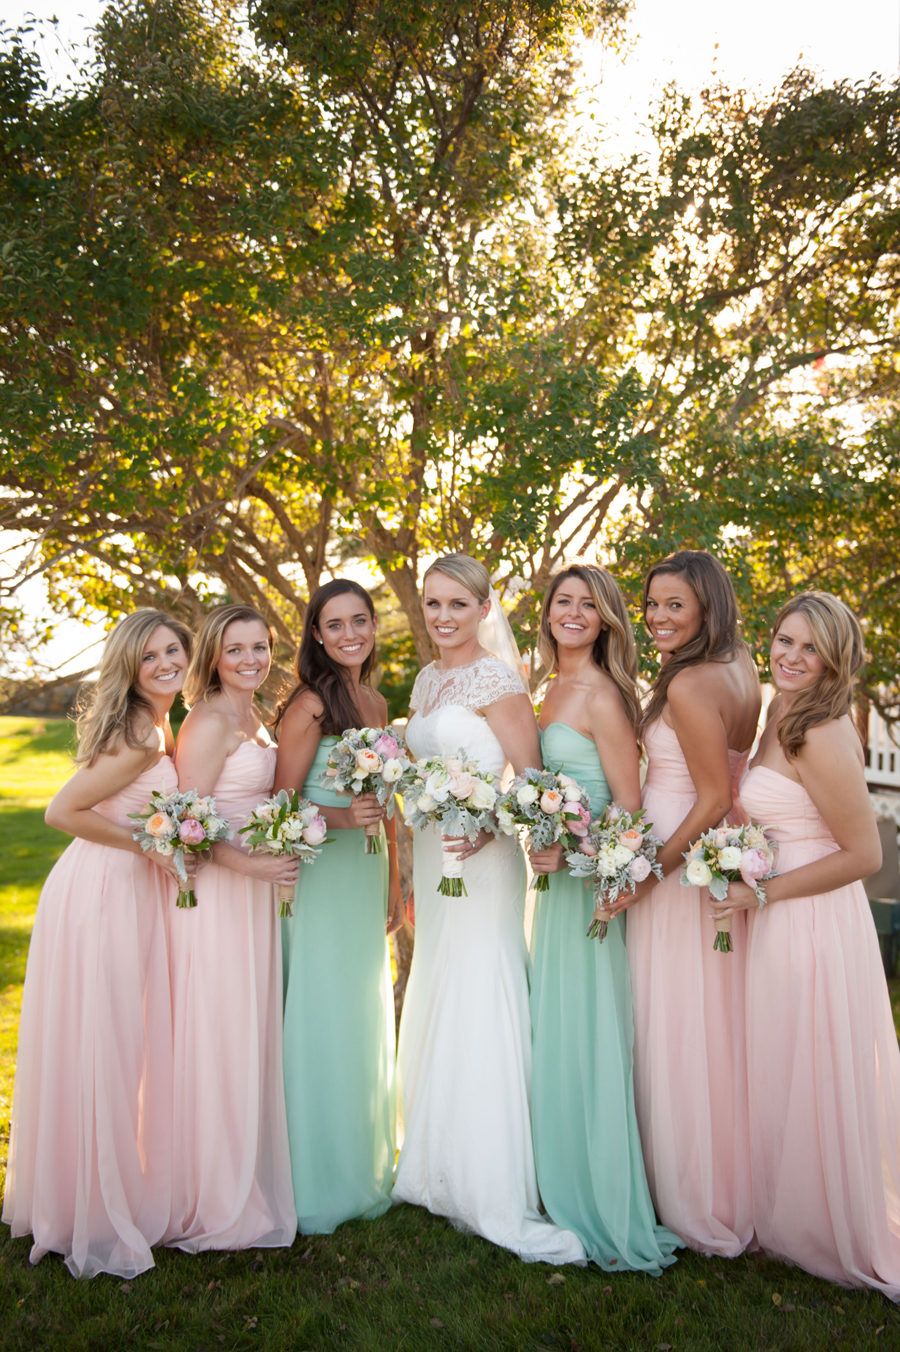 34 Refreshing Mint and Peach Wedding Color Inspiration | WeddingInclude ...